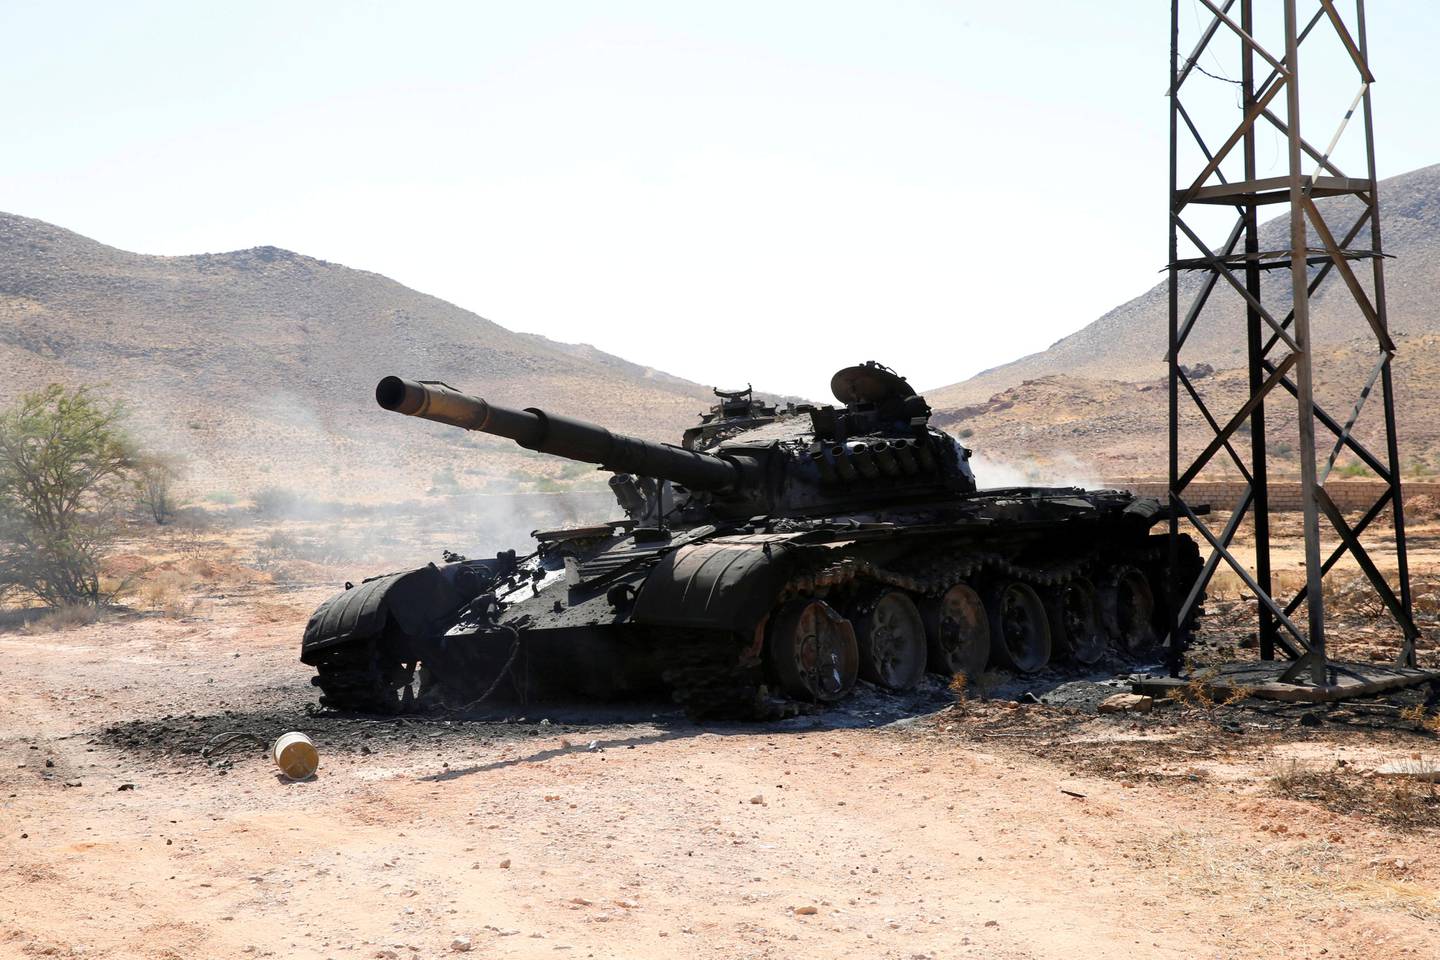 REFILE - CORRECTING GRAMMAR A destroyed and burnt tank, that belongs to the eastern forces led by Khalifa Haftar, is seen in Gharyan south of Tripoli Libya June 27, 2019. REUTERS/Ismail Zitouny